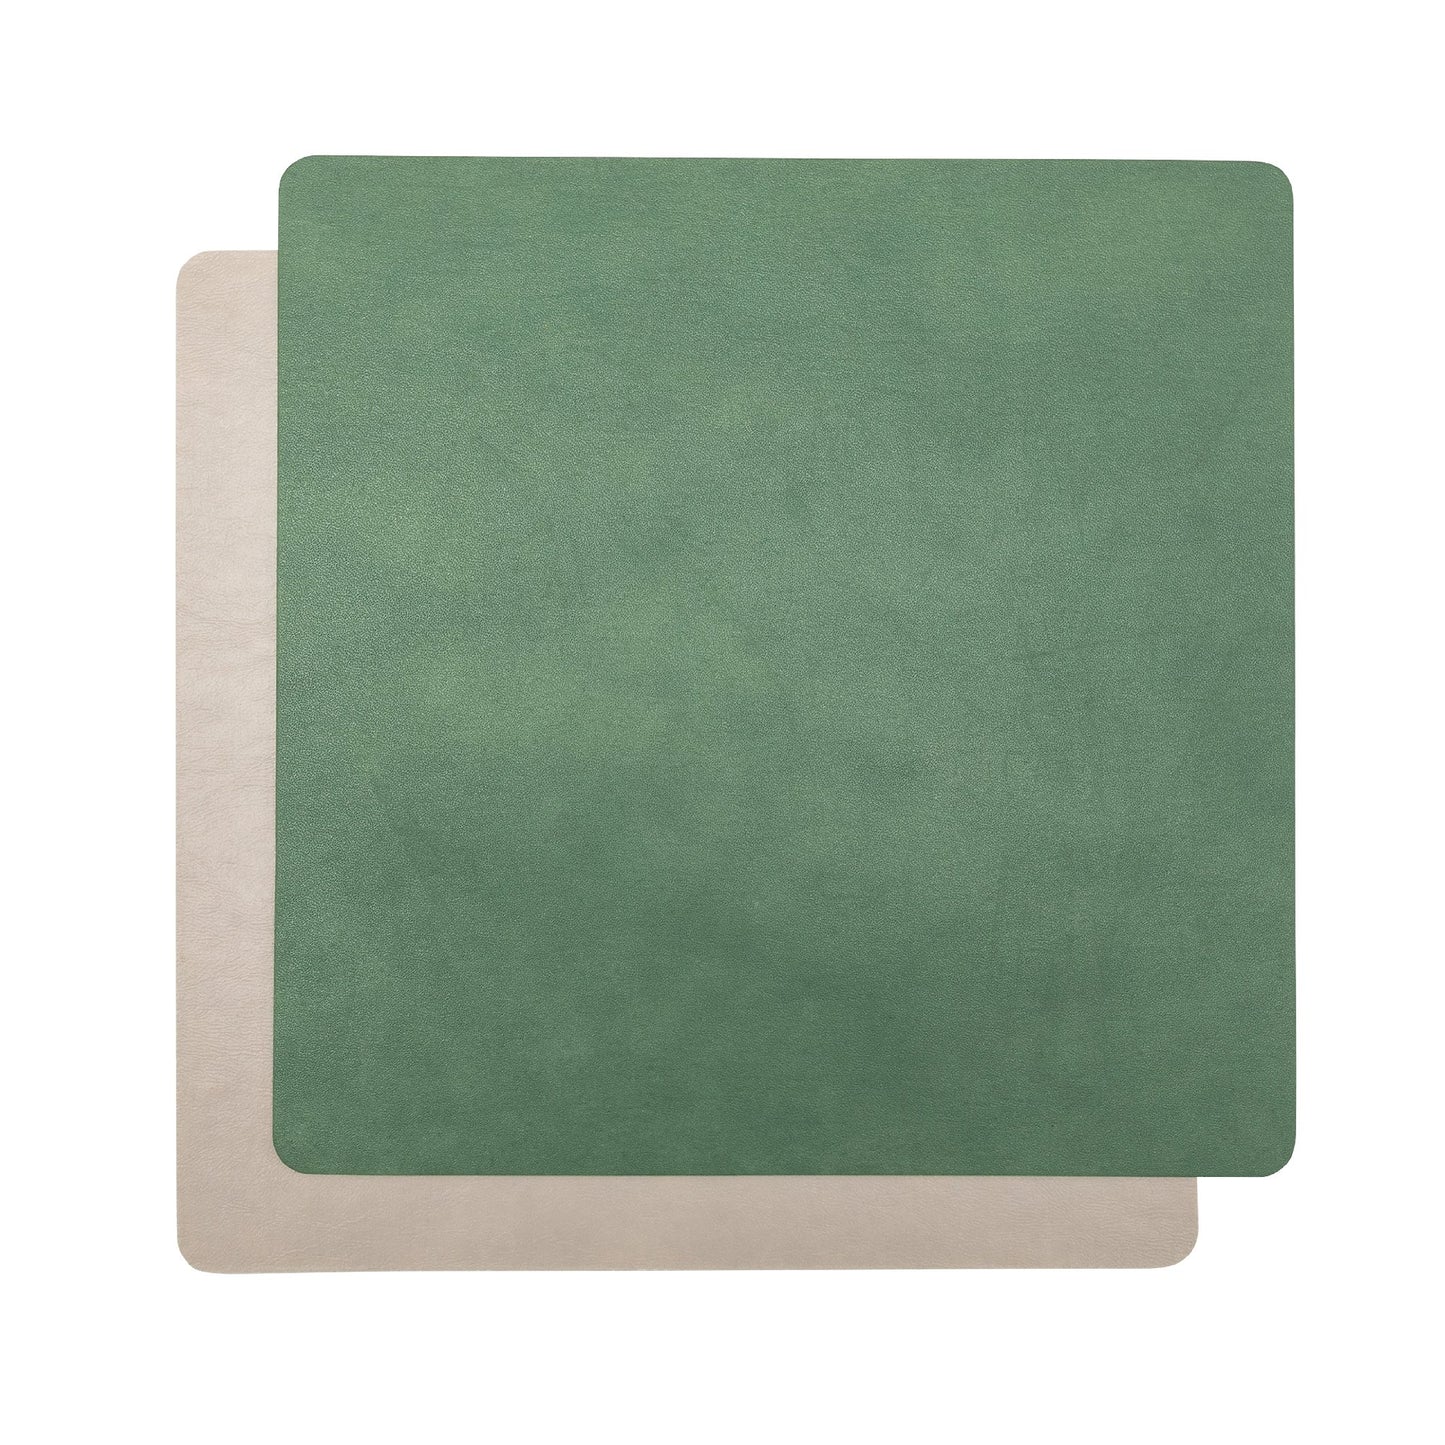 Two square washable paper placemats are shown one on top of the other. The one in the foreground is green and the one at the rear is beige. 